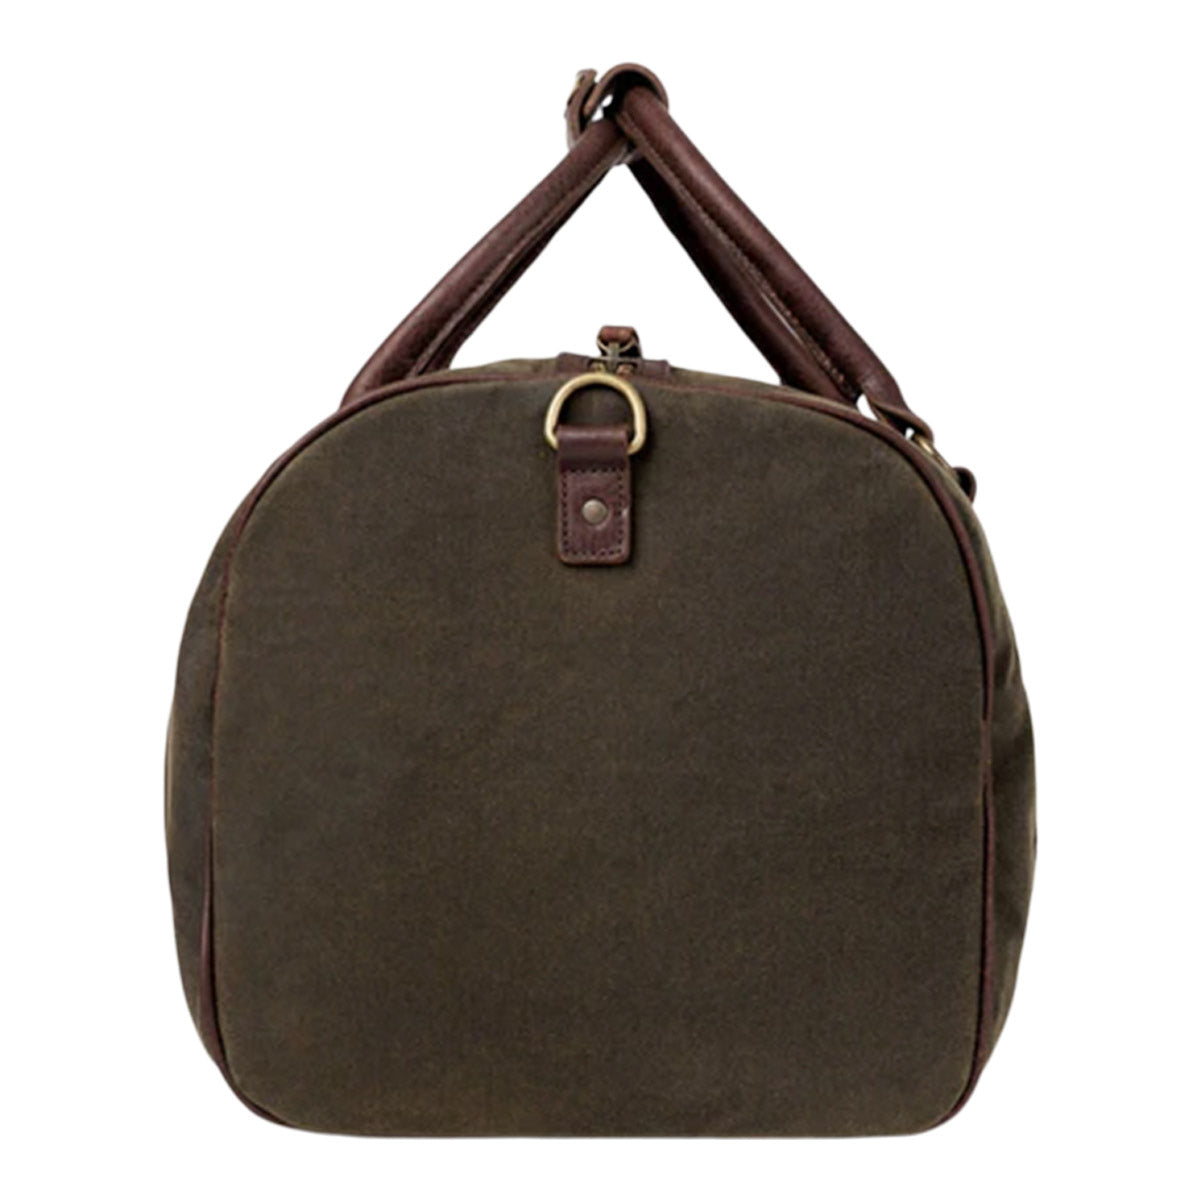 Mission Mercantile Campaign Waxed Canvas Field Duffle Bag